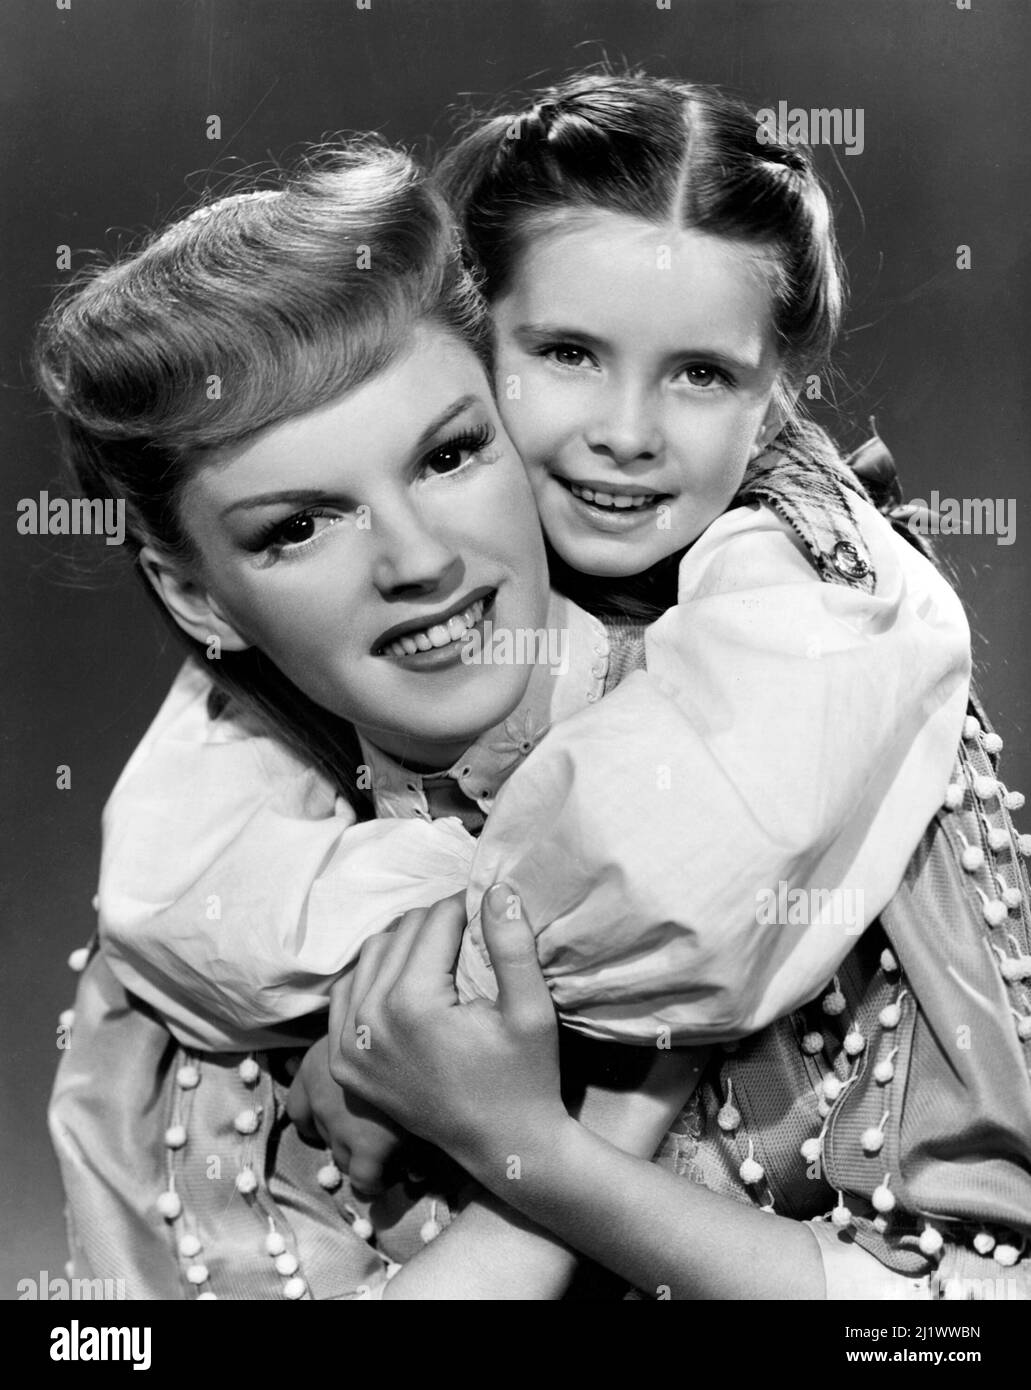 JUDY GARLAND and MARGARET O'BRIEN in MEET ME IN ST. LOUIS (1944), directed by VINCENTE MINNELLI. Credit: M.G.M. / Album Stock Photo